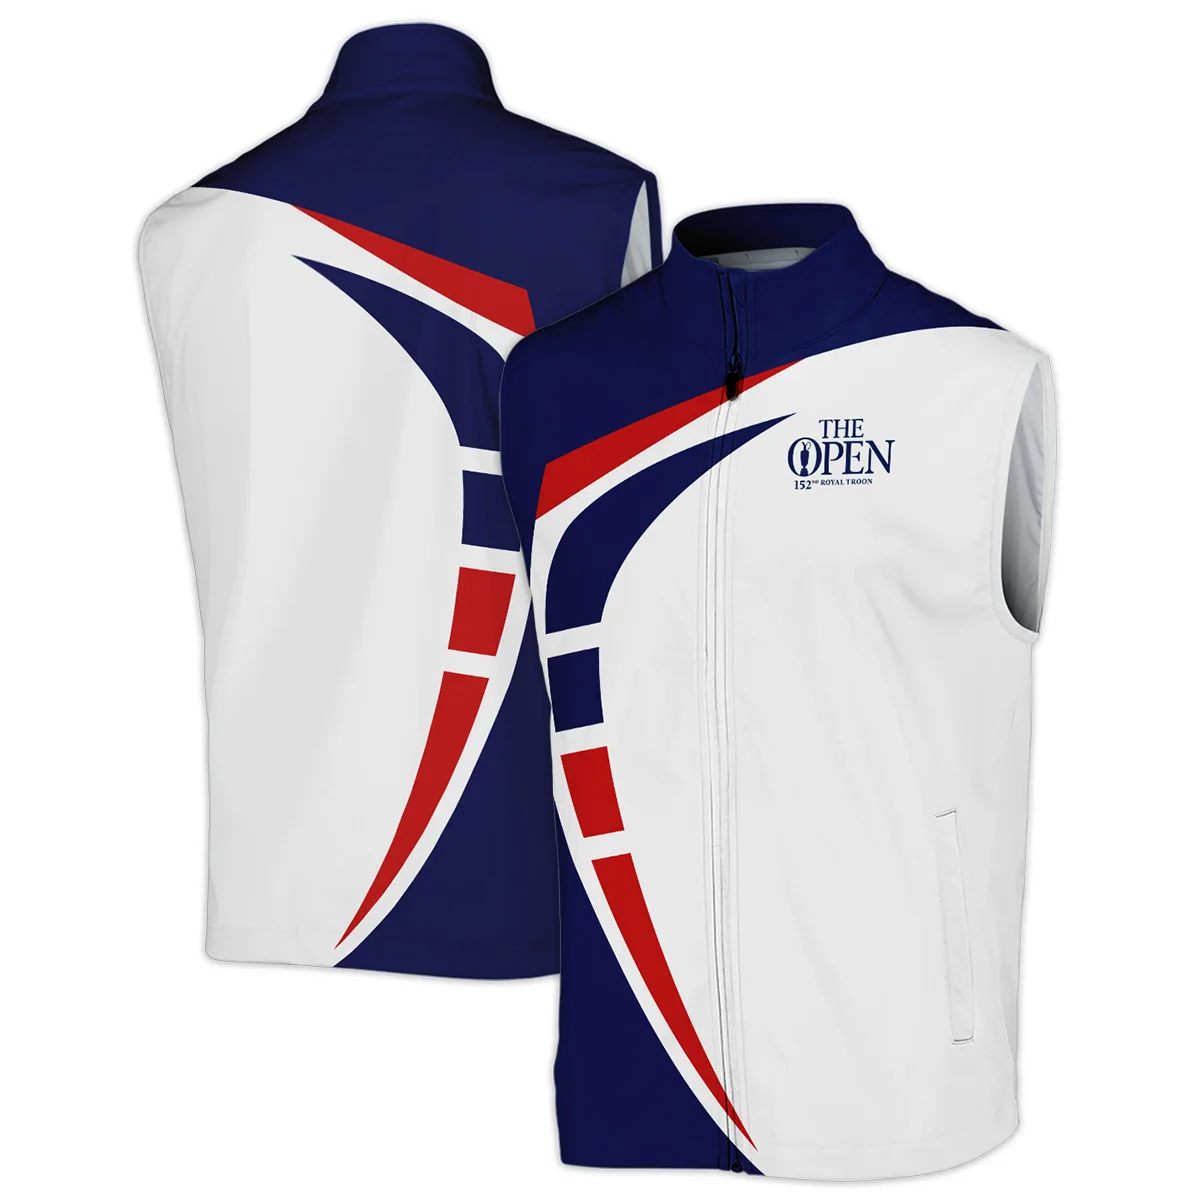 152nd Open Championship Titleist White Blue Red Pattern Background Sleeveless Jacket All Over Prints HOTOP270624A03TLSJK